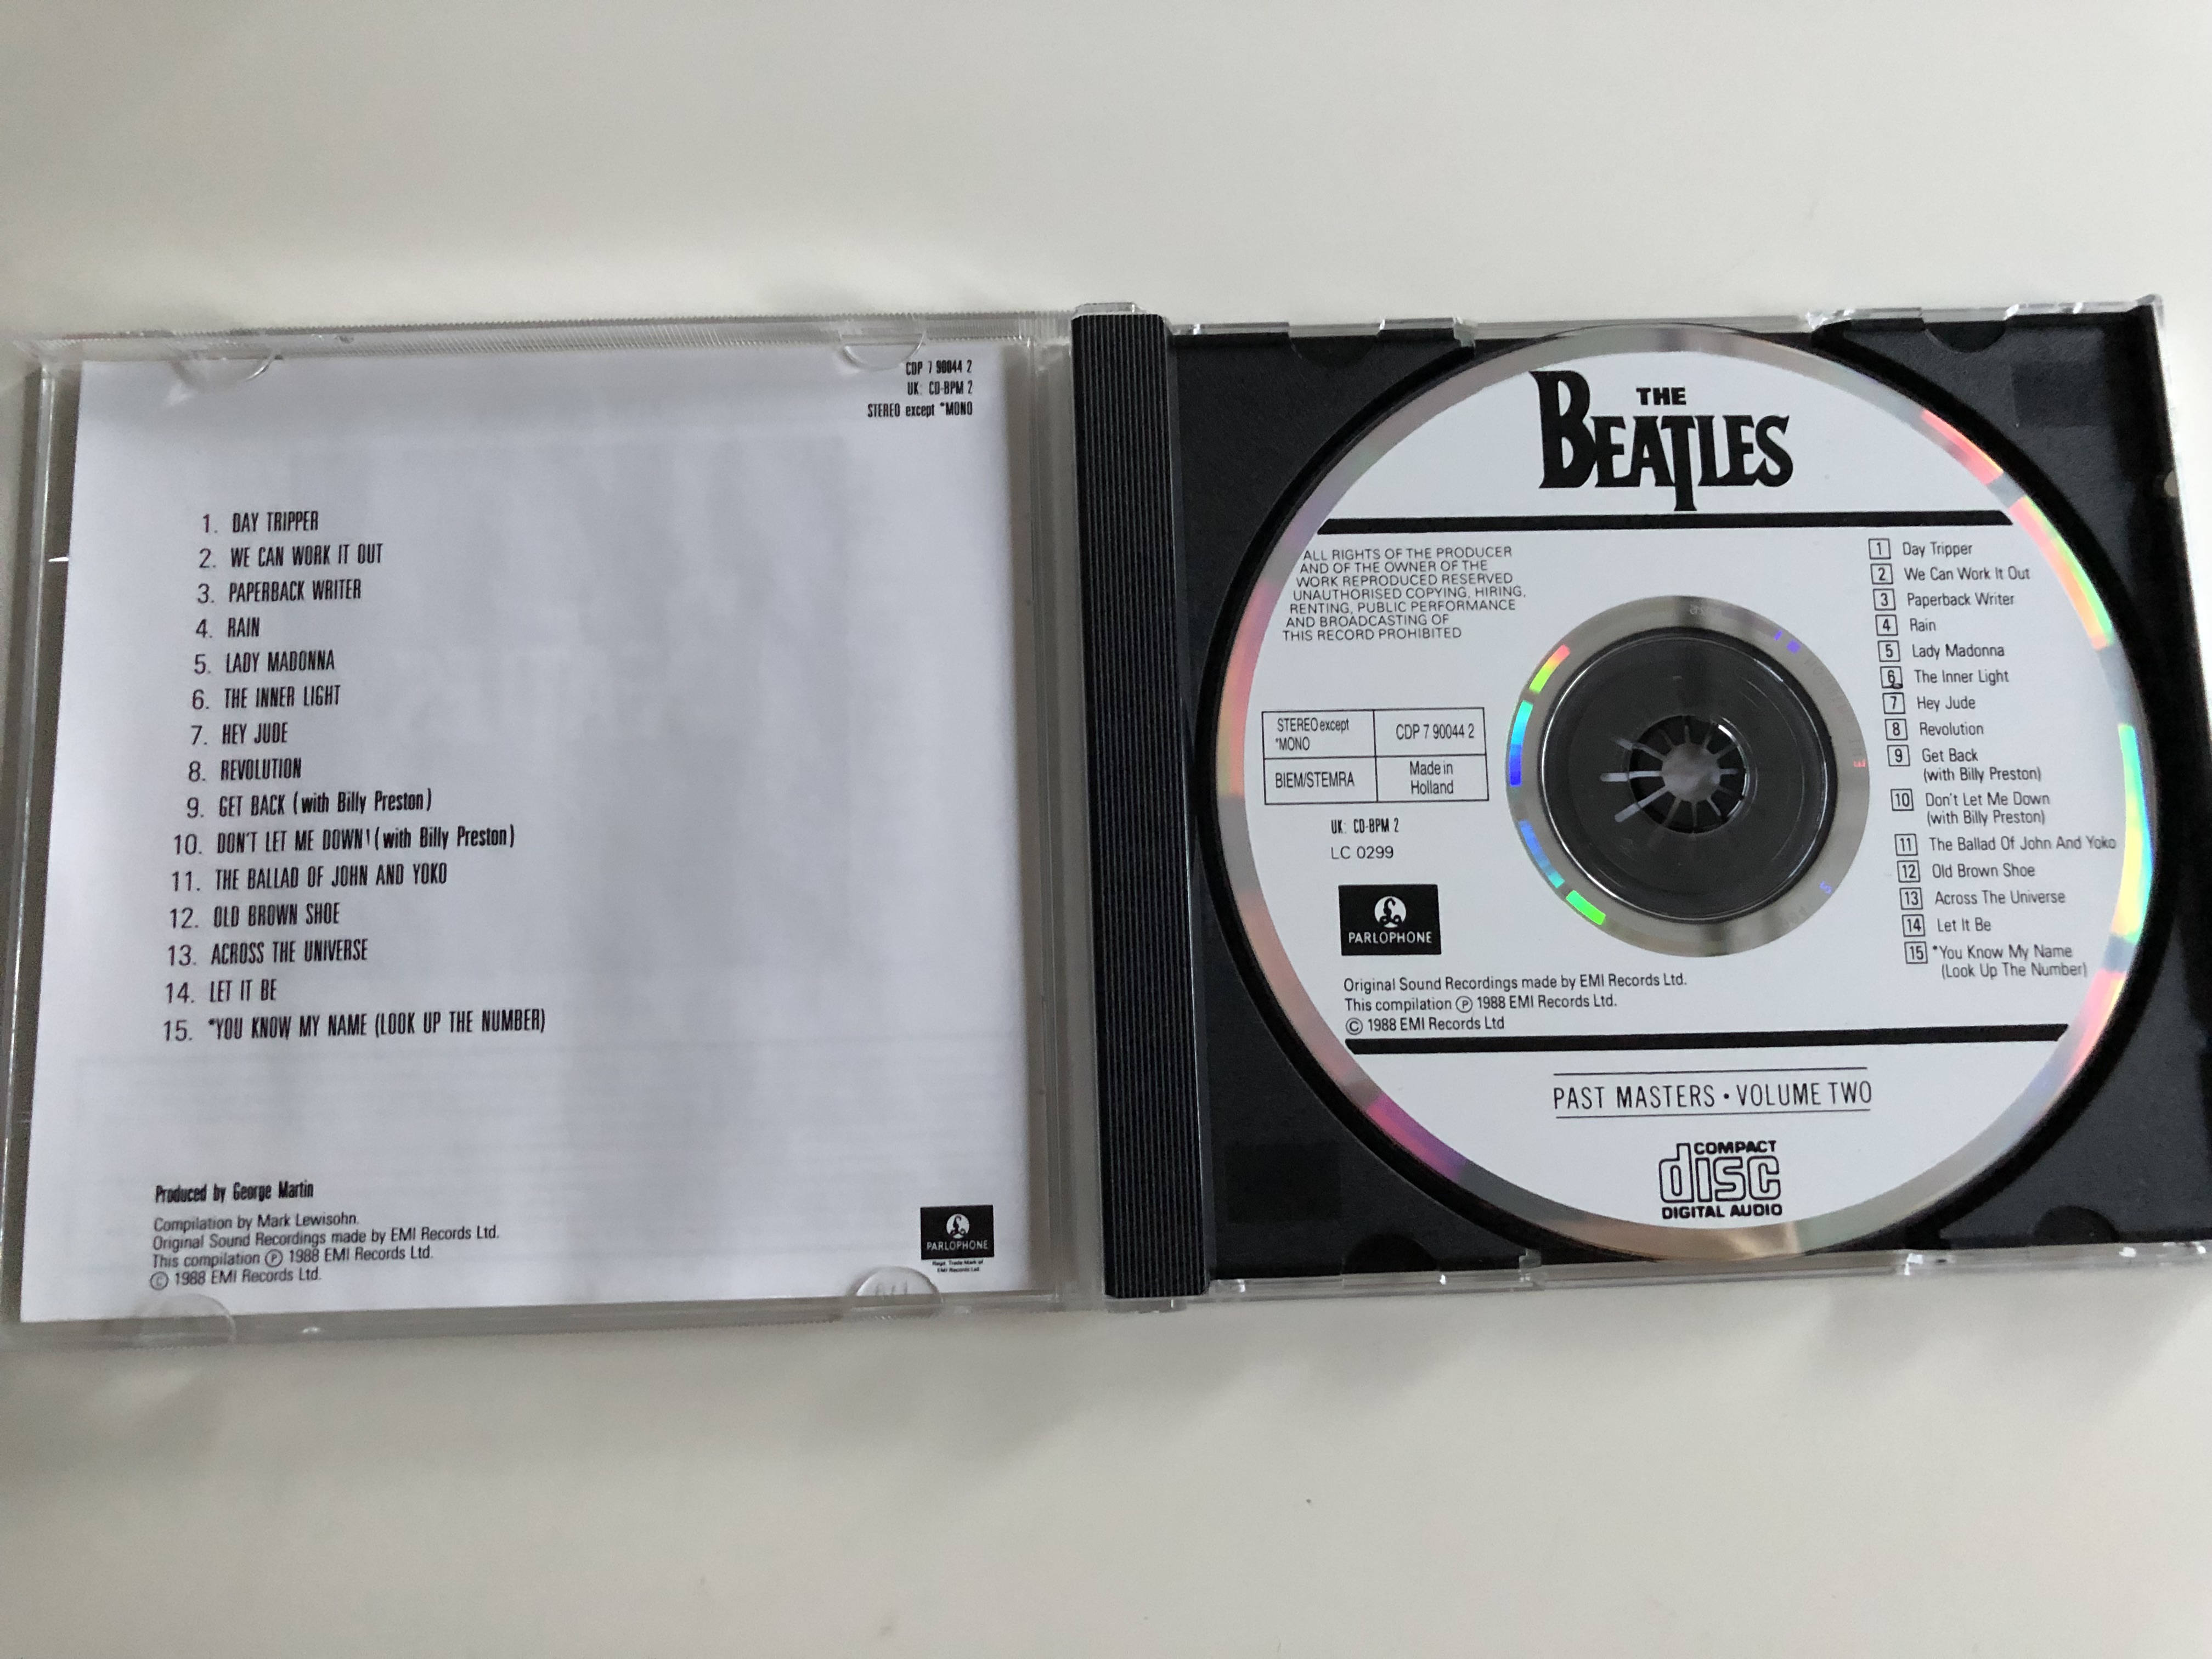 the-beatles-past-masters-volume-two-audio-cd-1988-emi-records-cdp-7900442-pm-518-8-.jpg